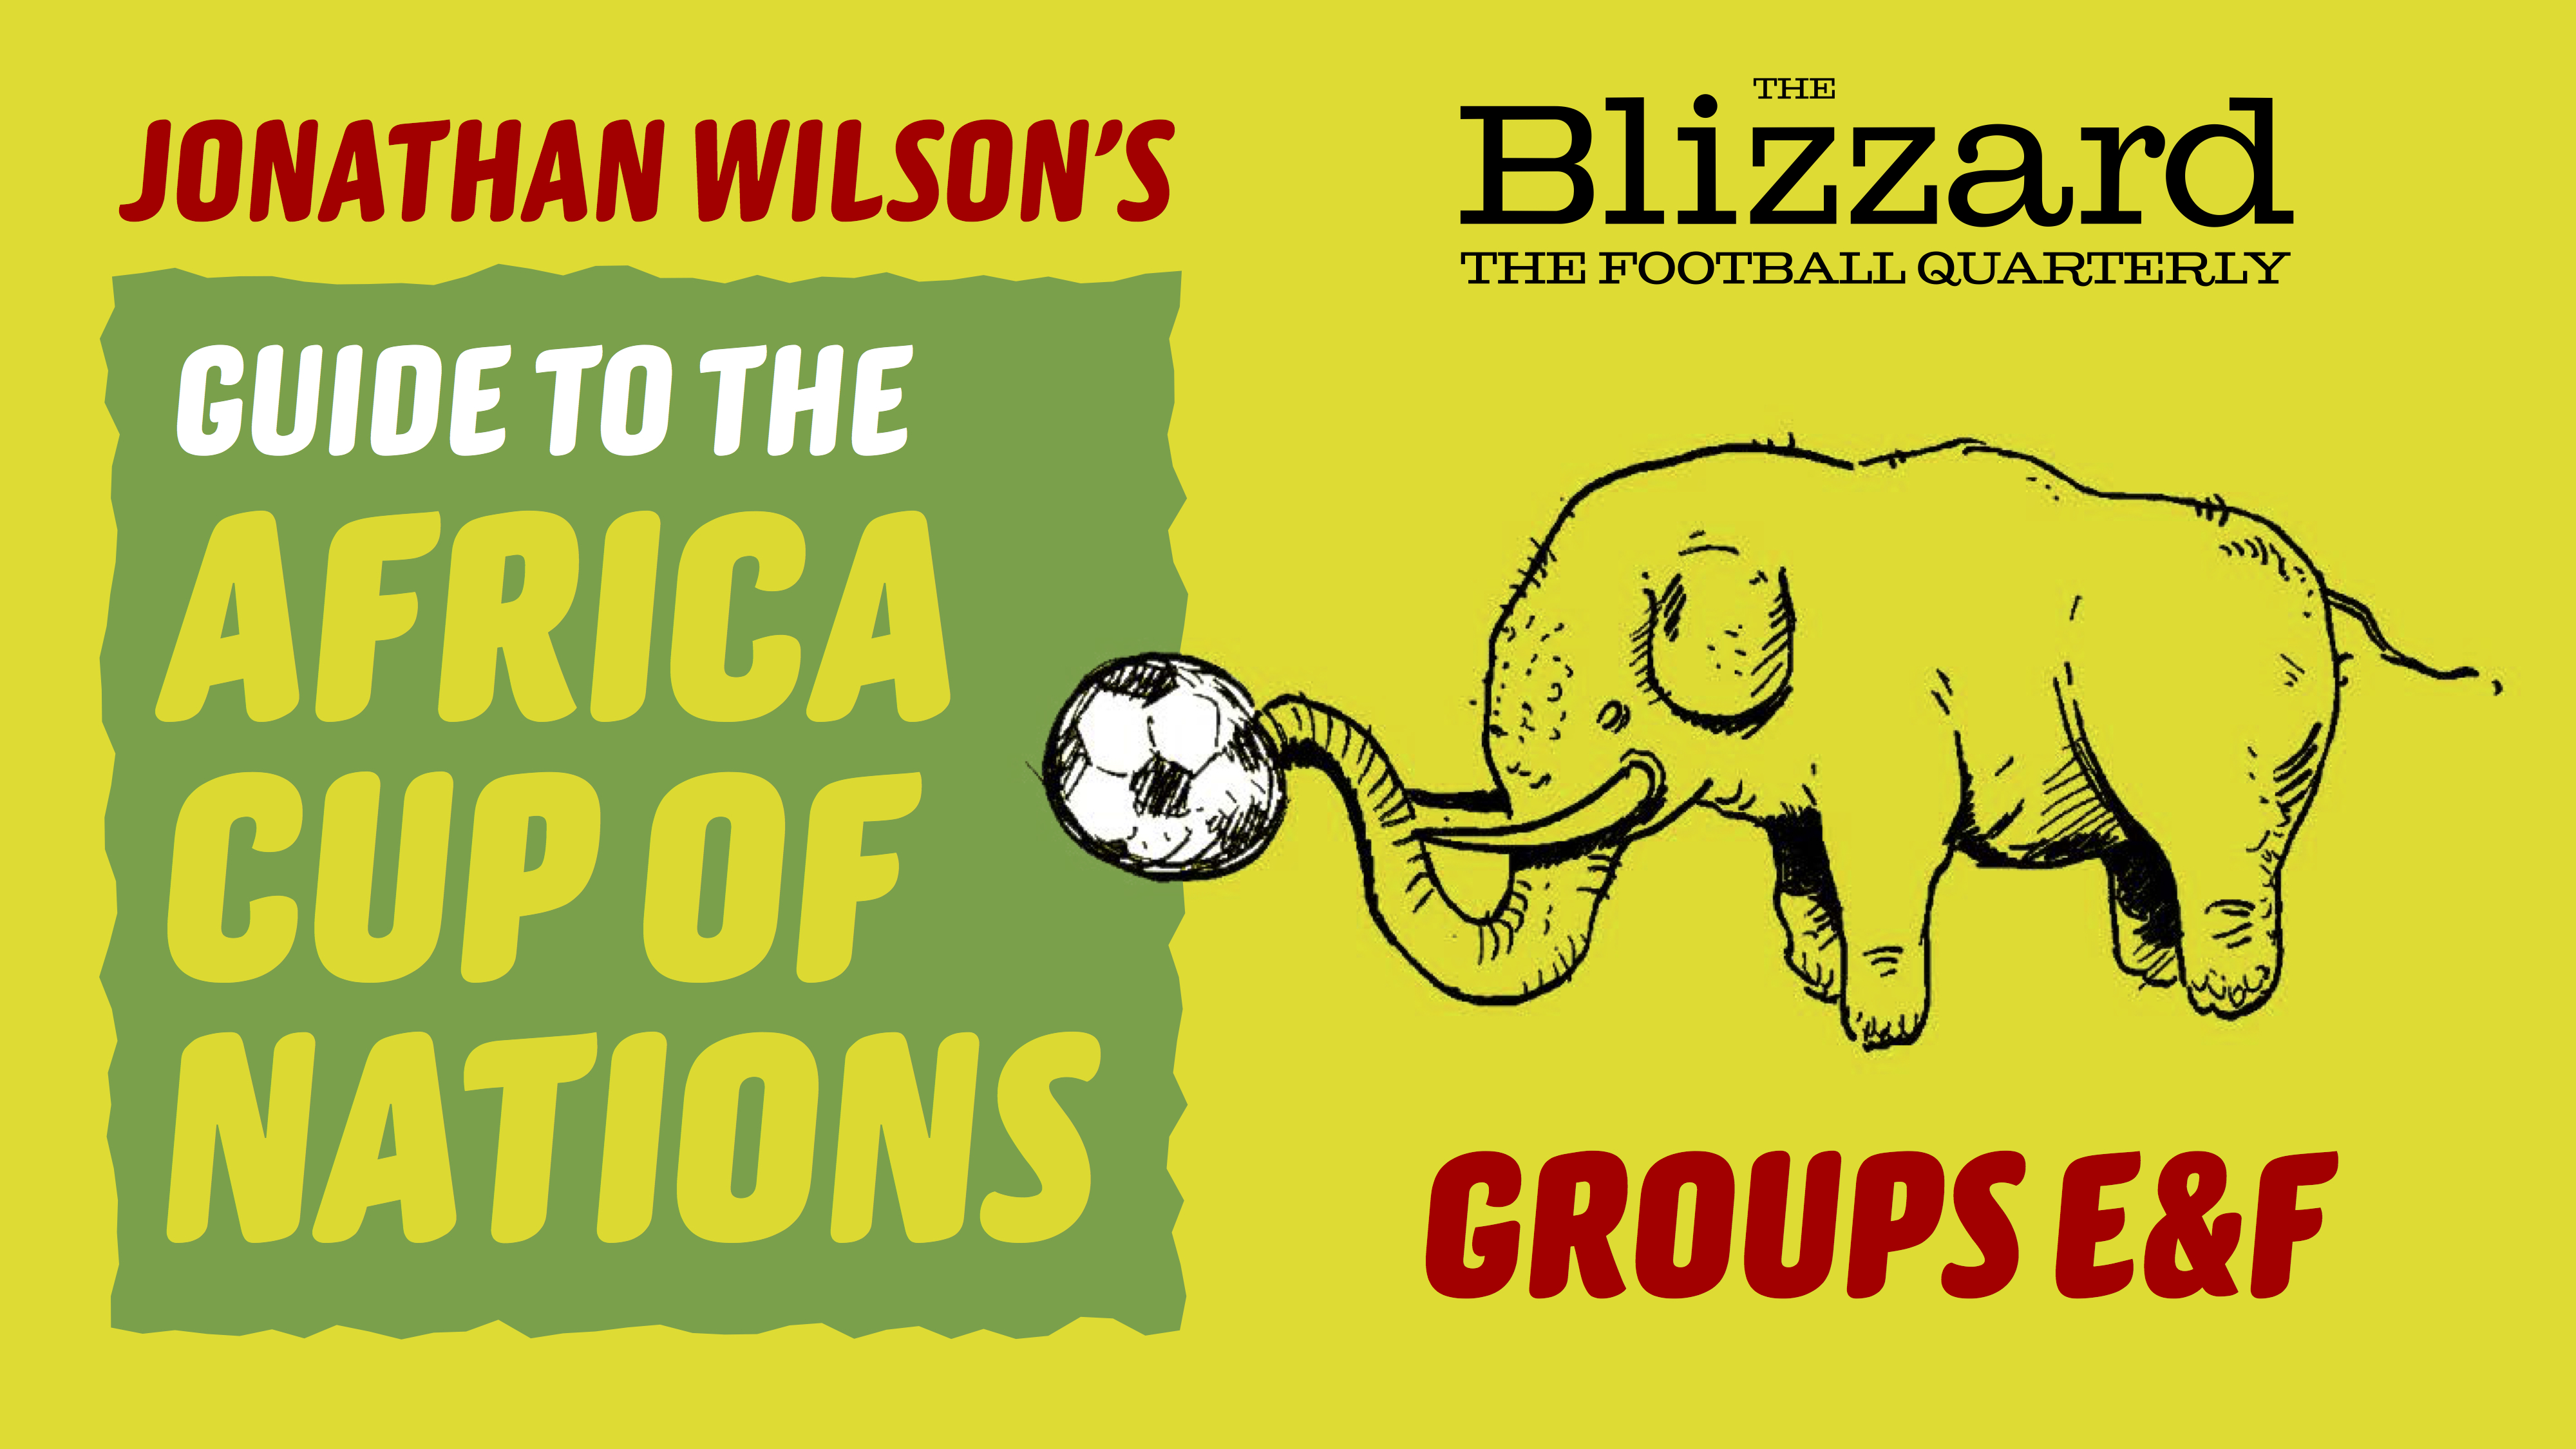 Groups E & F – Jonathan Wilson’s Guide to Afcon 2019